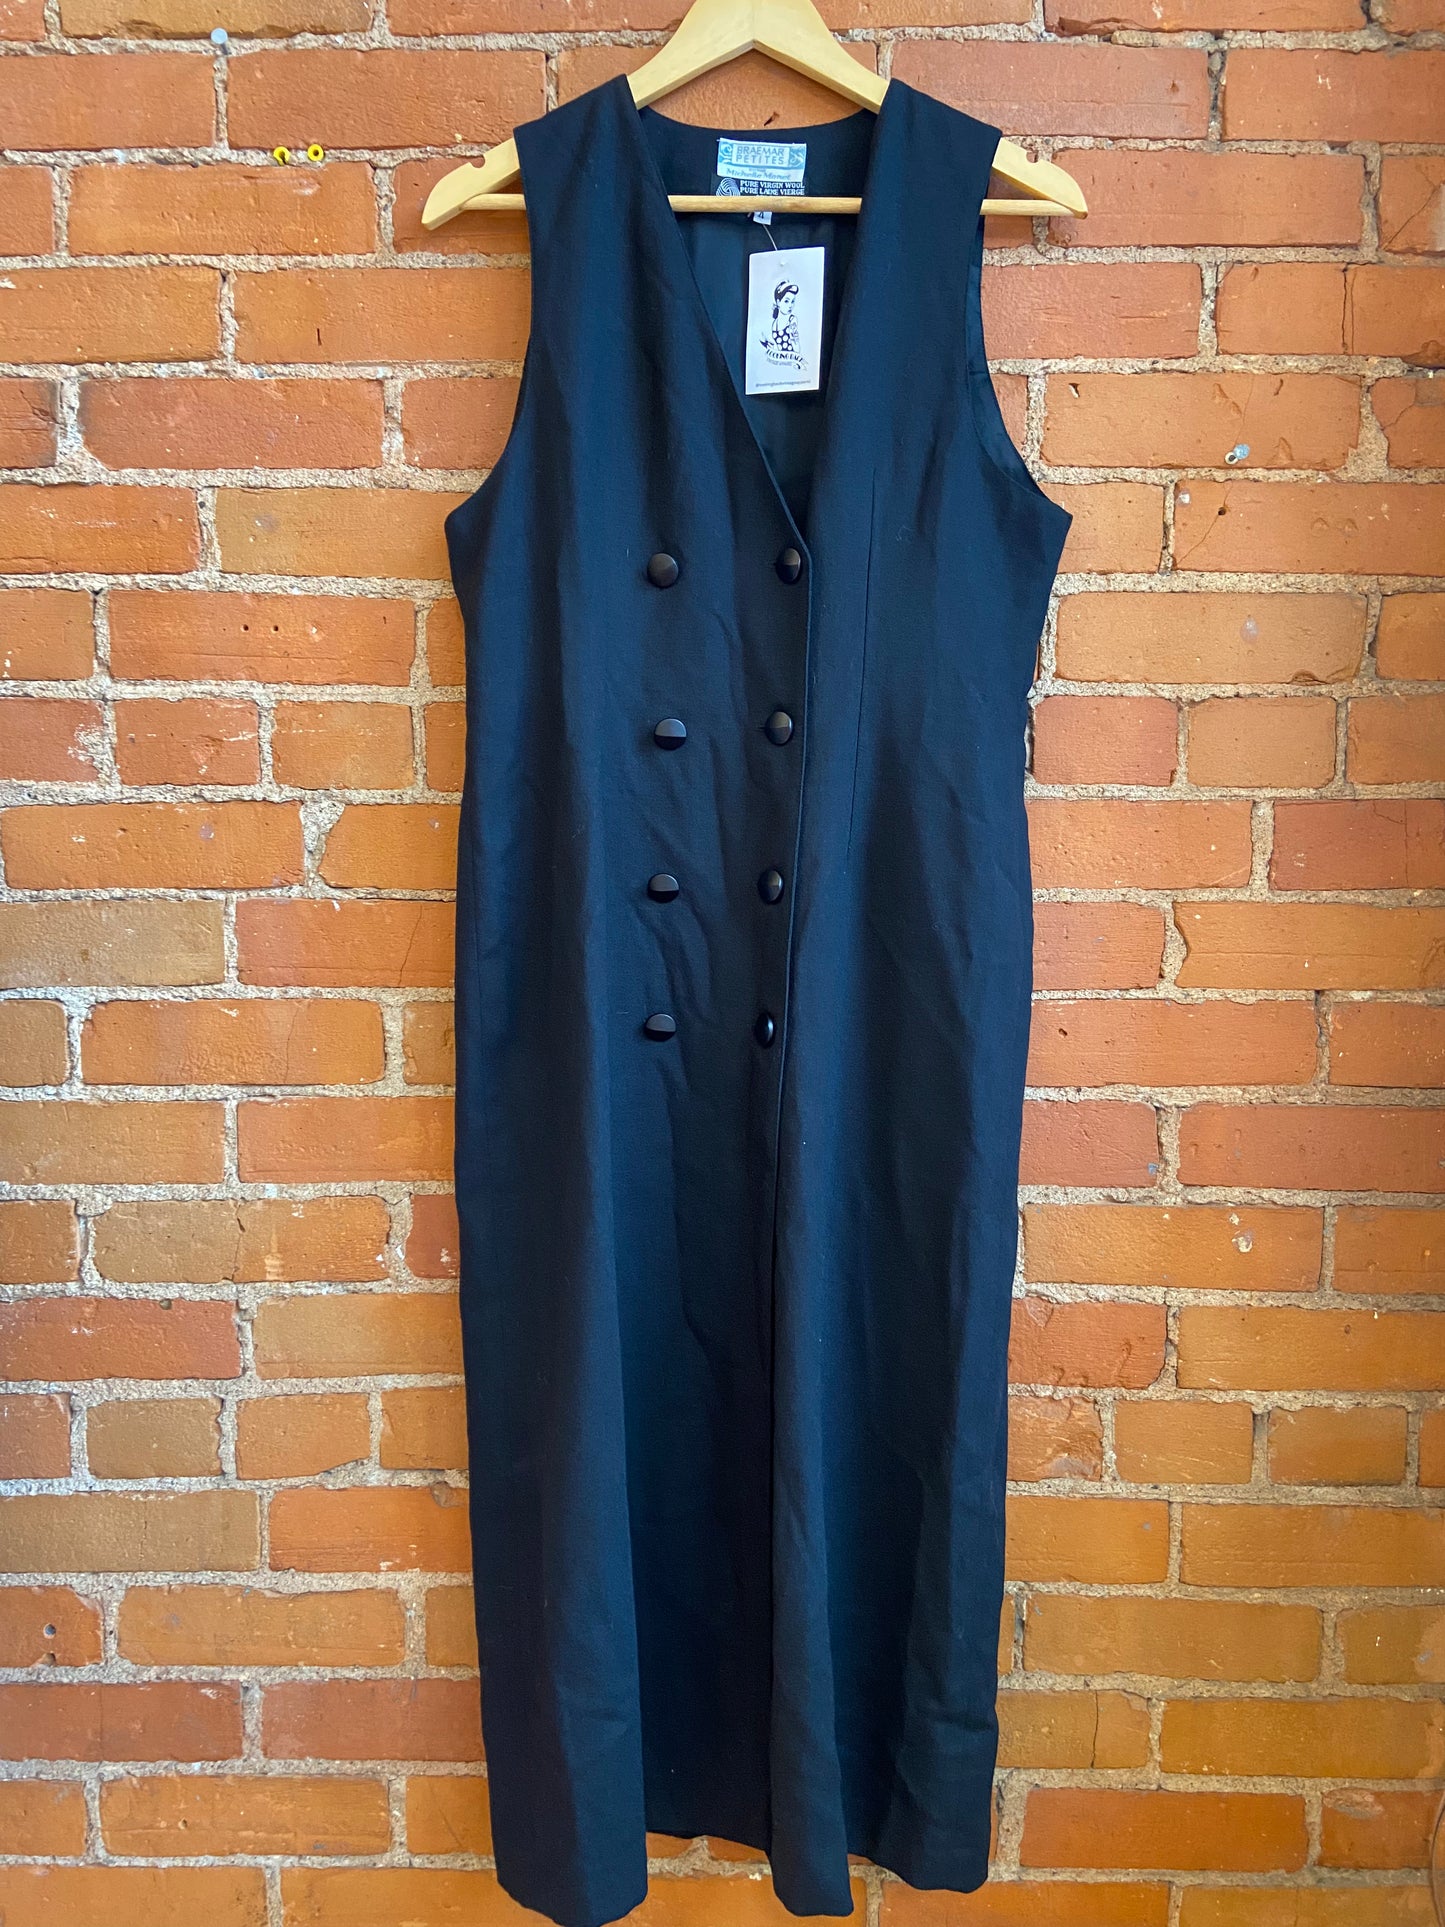 Black Maxi Wool Dress with Buttons